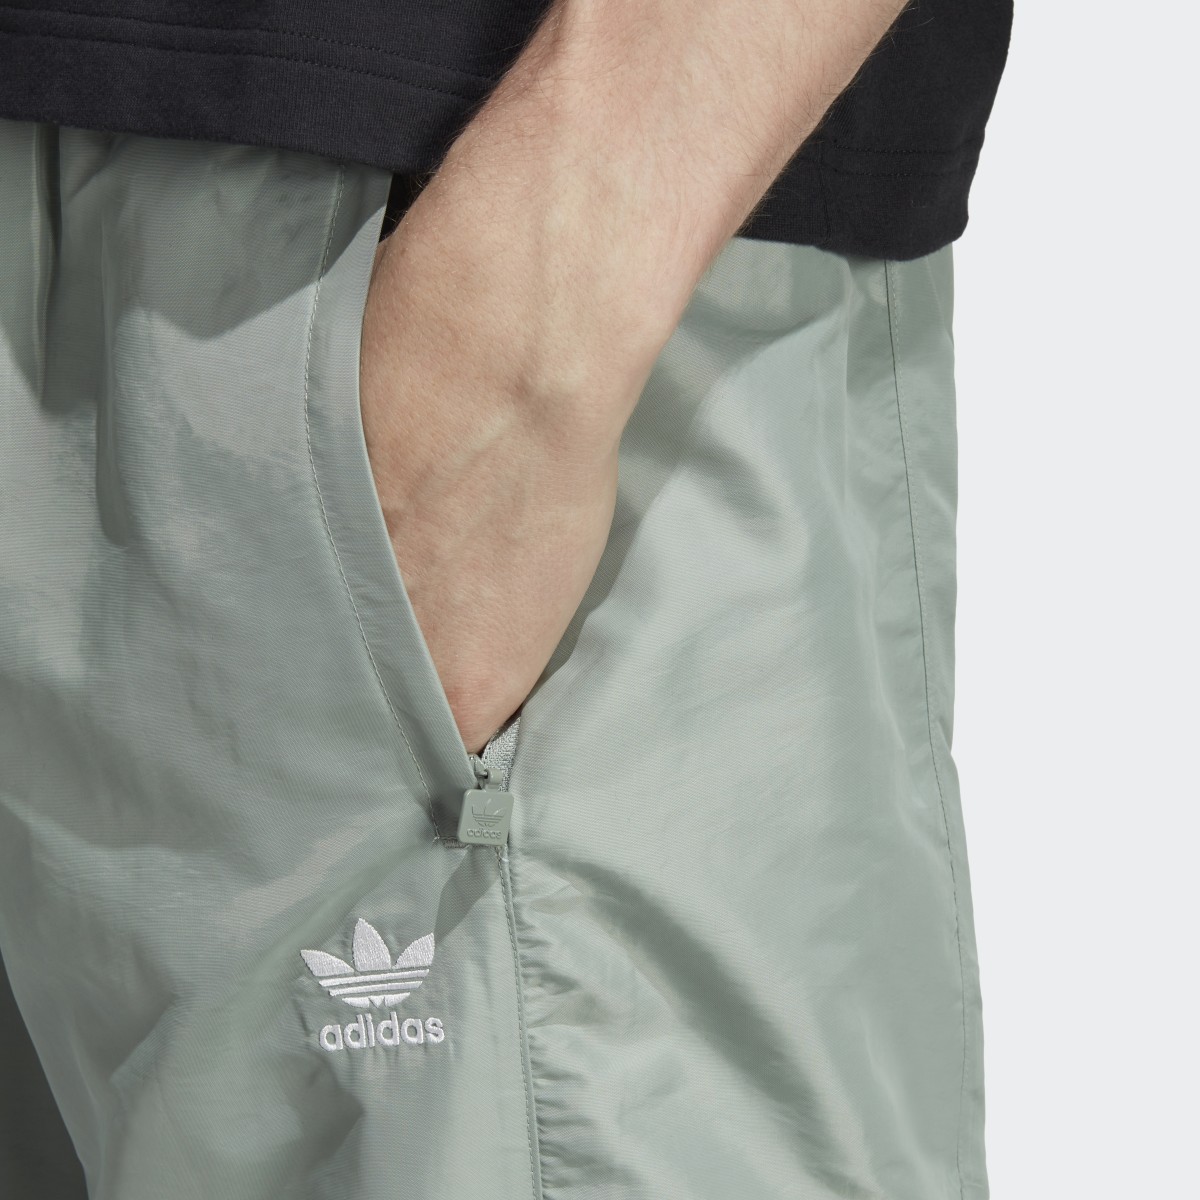 Adidas Rekive Woven Track Tracksuit Bottoms. 7